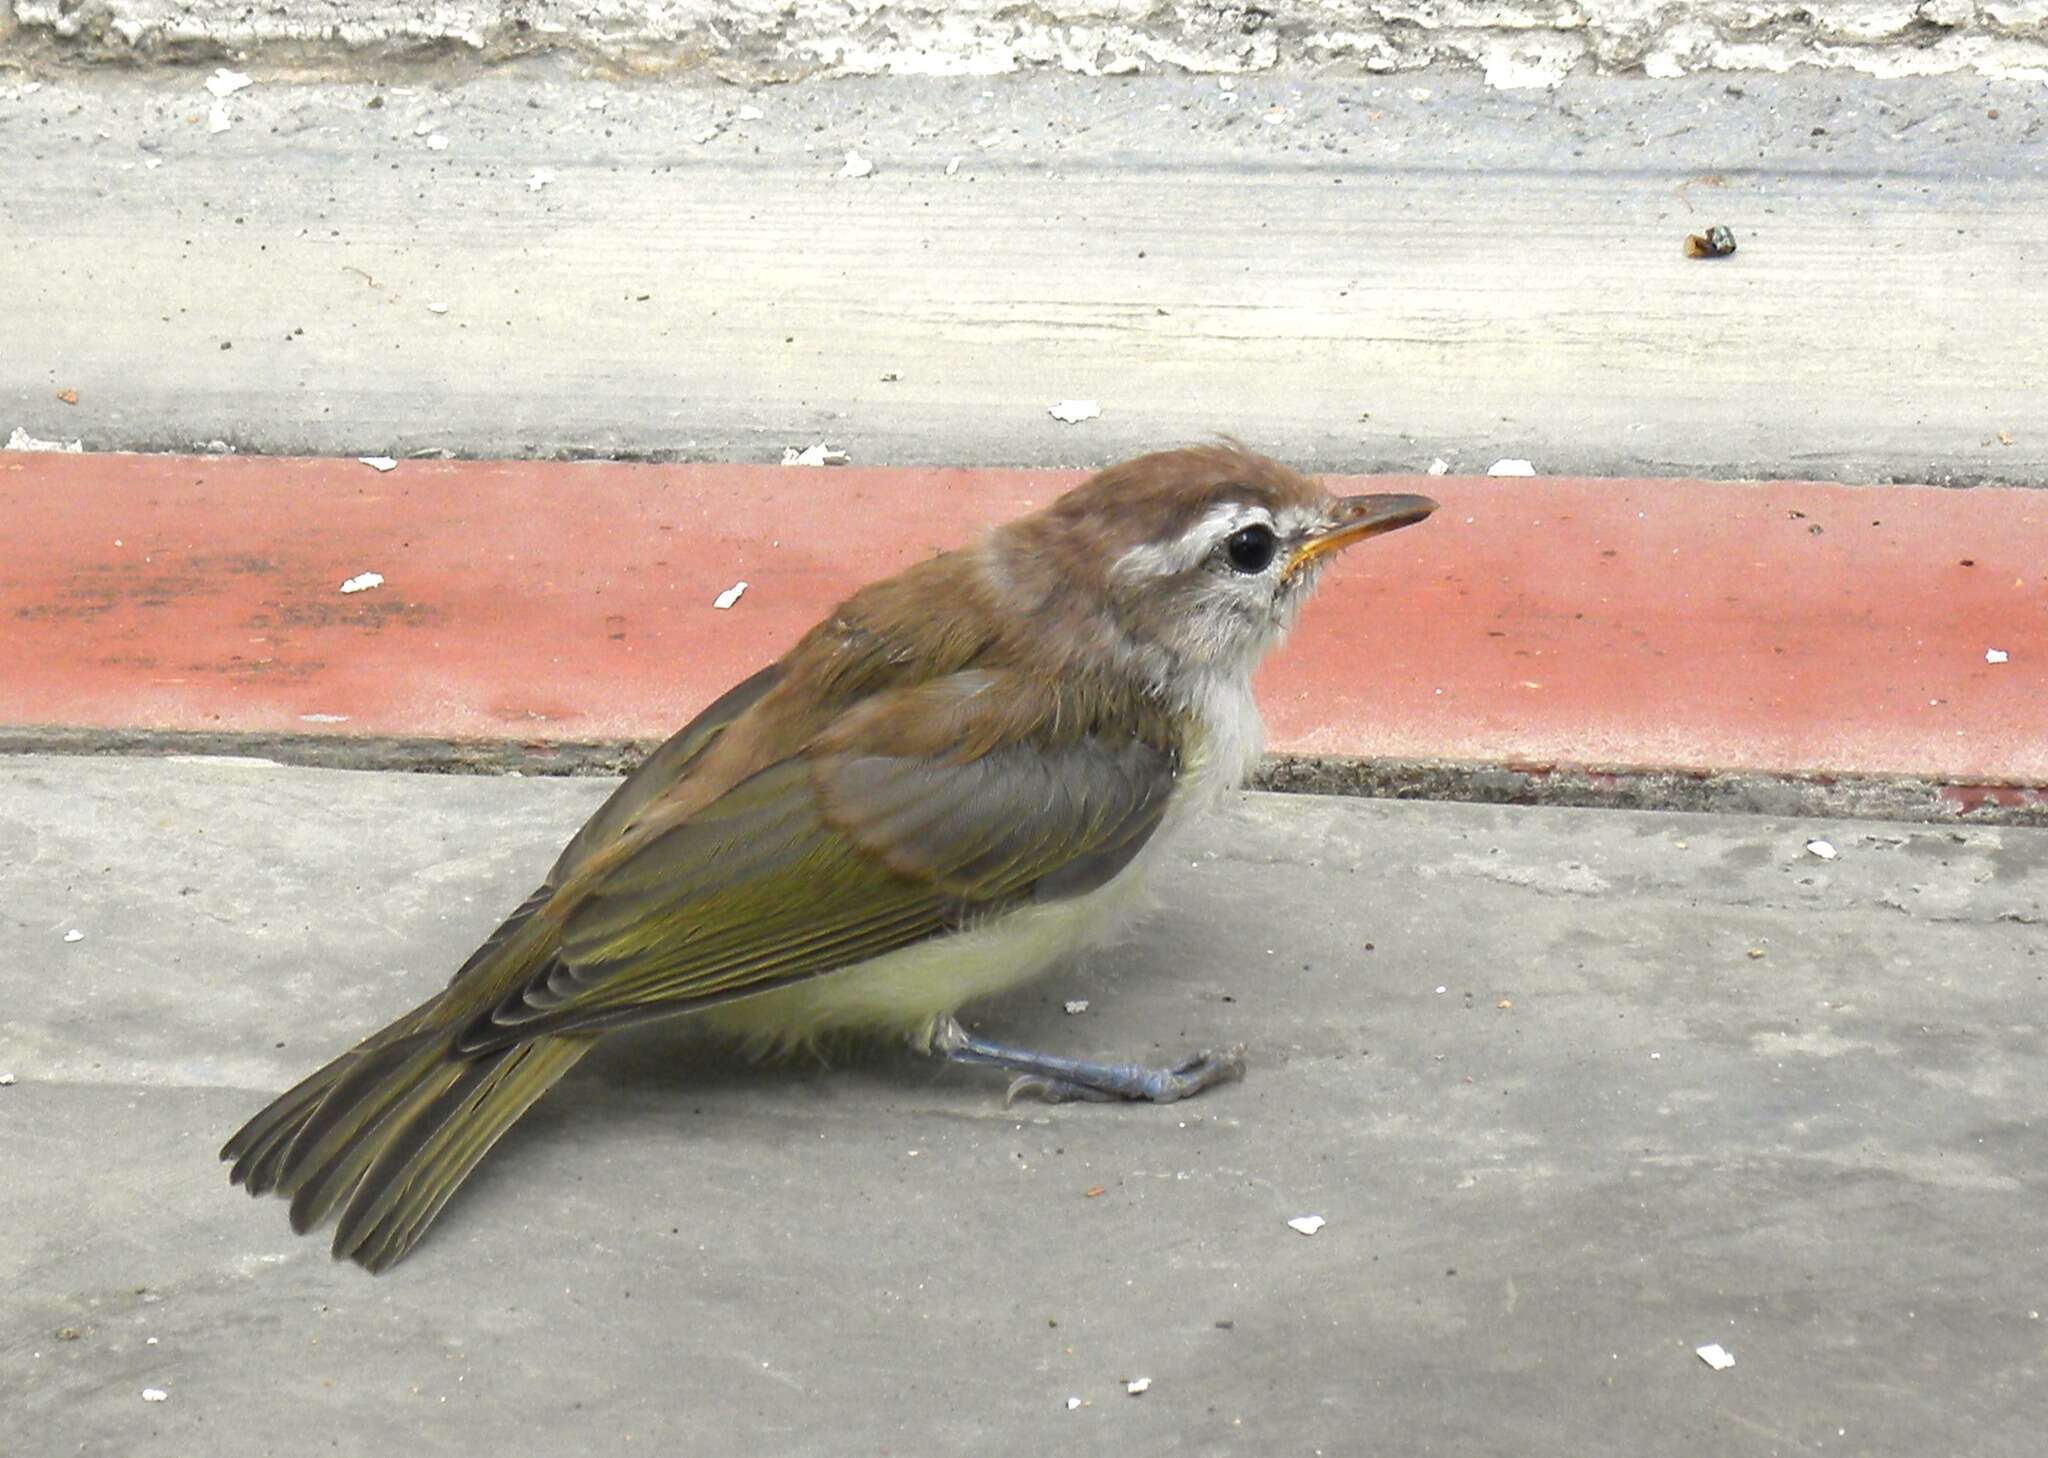 Image of Brown-capped Vireo